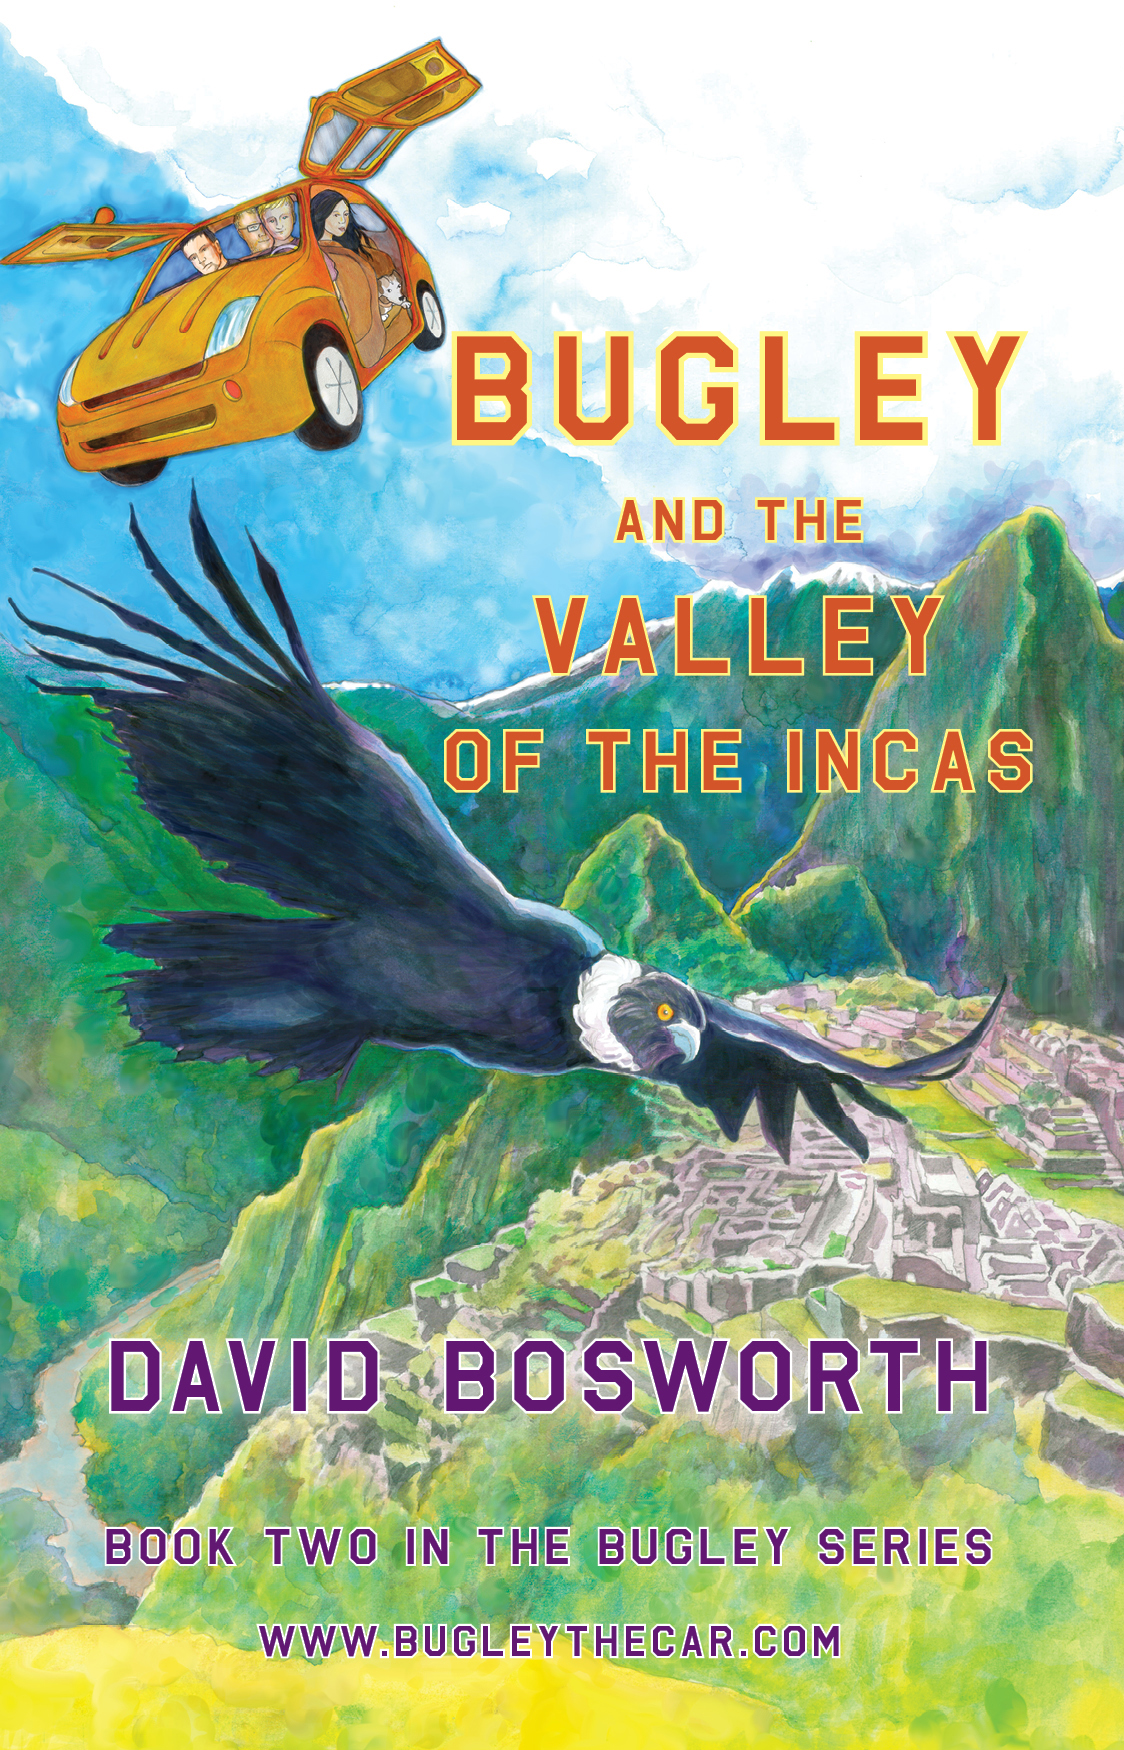 Bugley and the Valley of the Incass